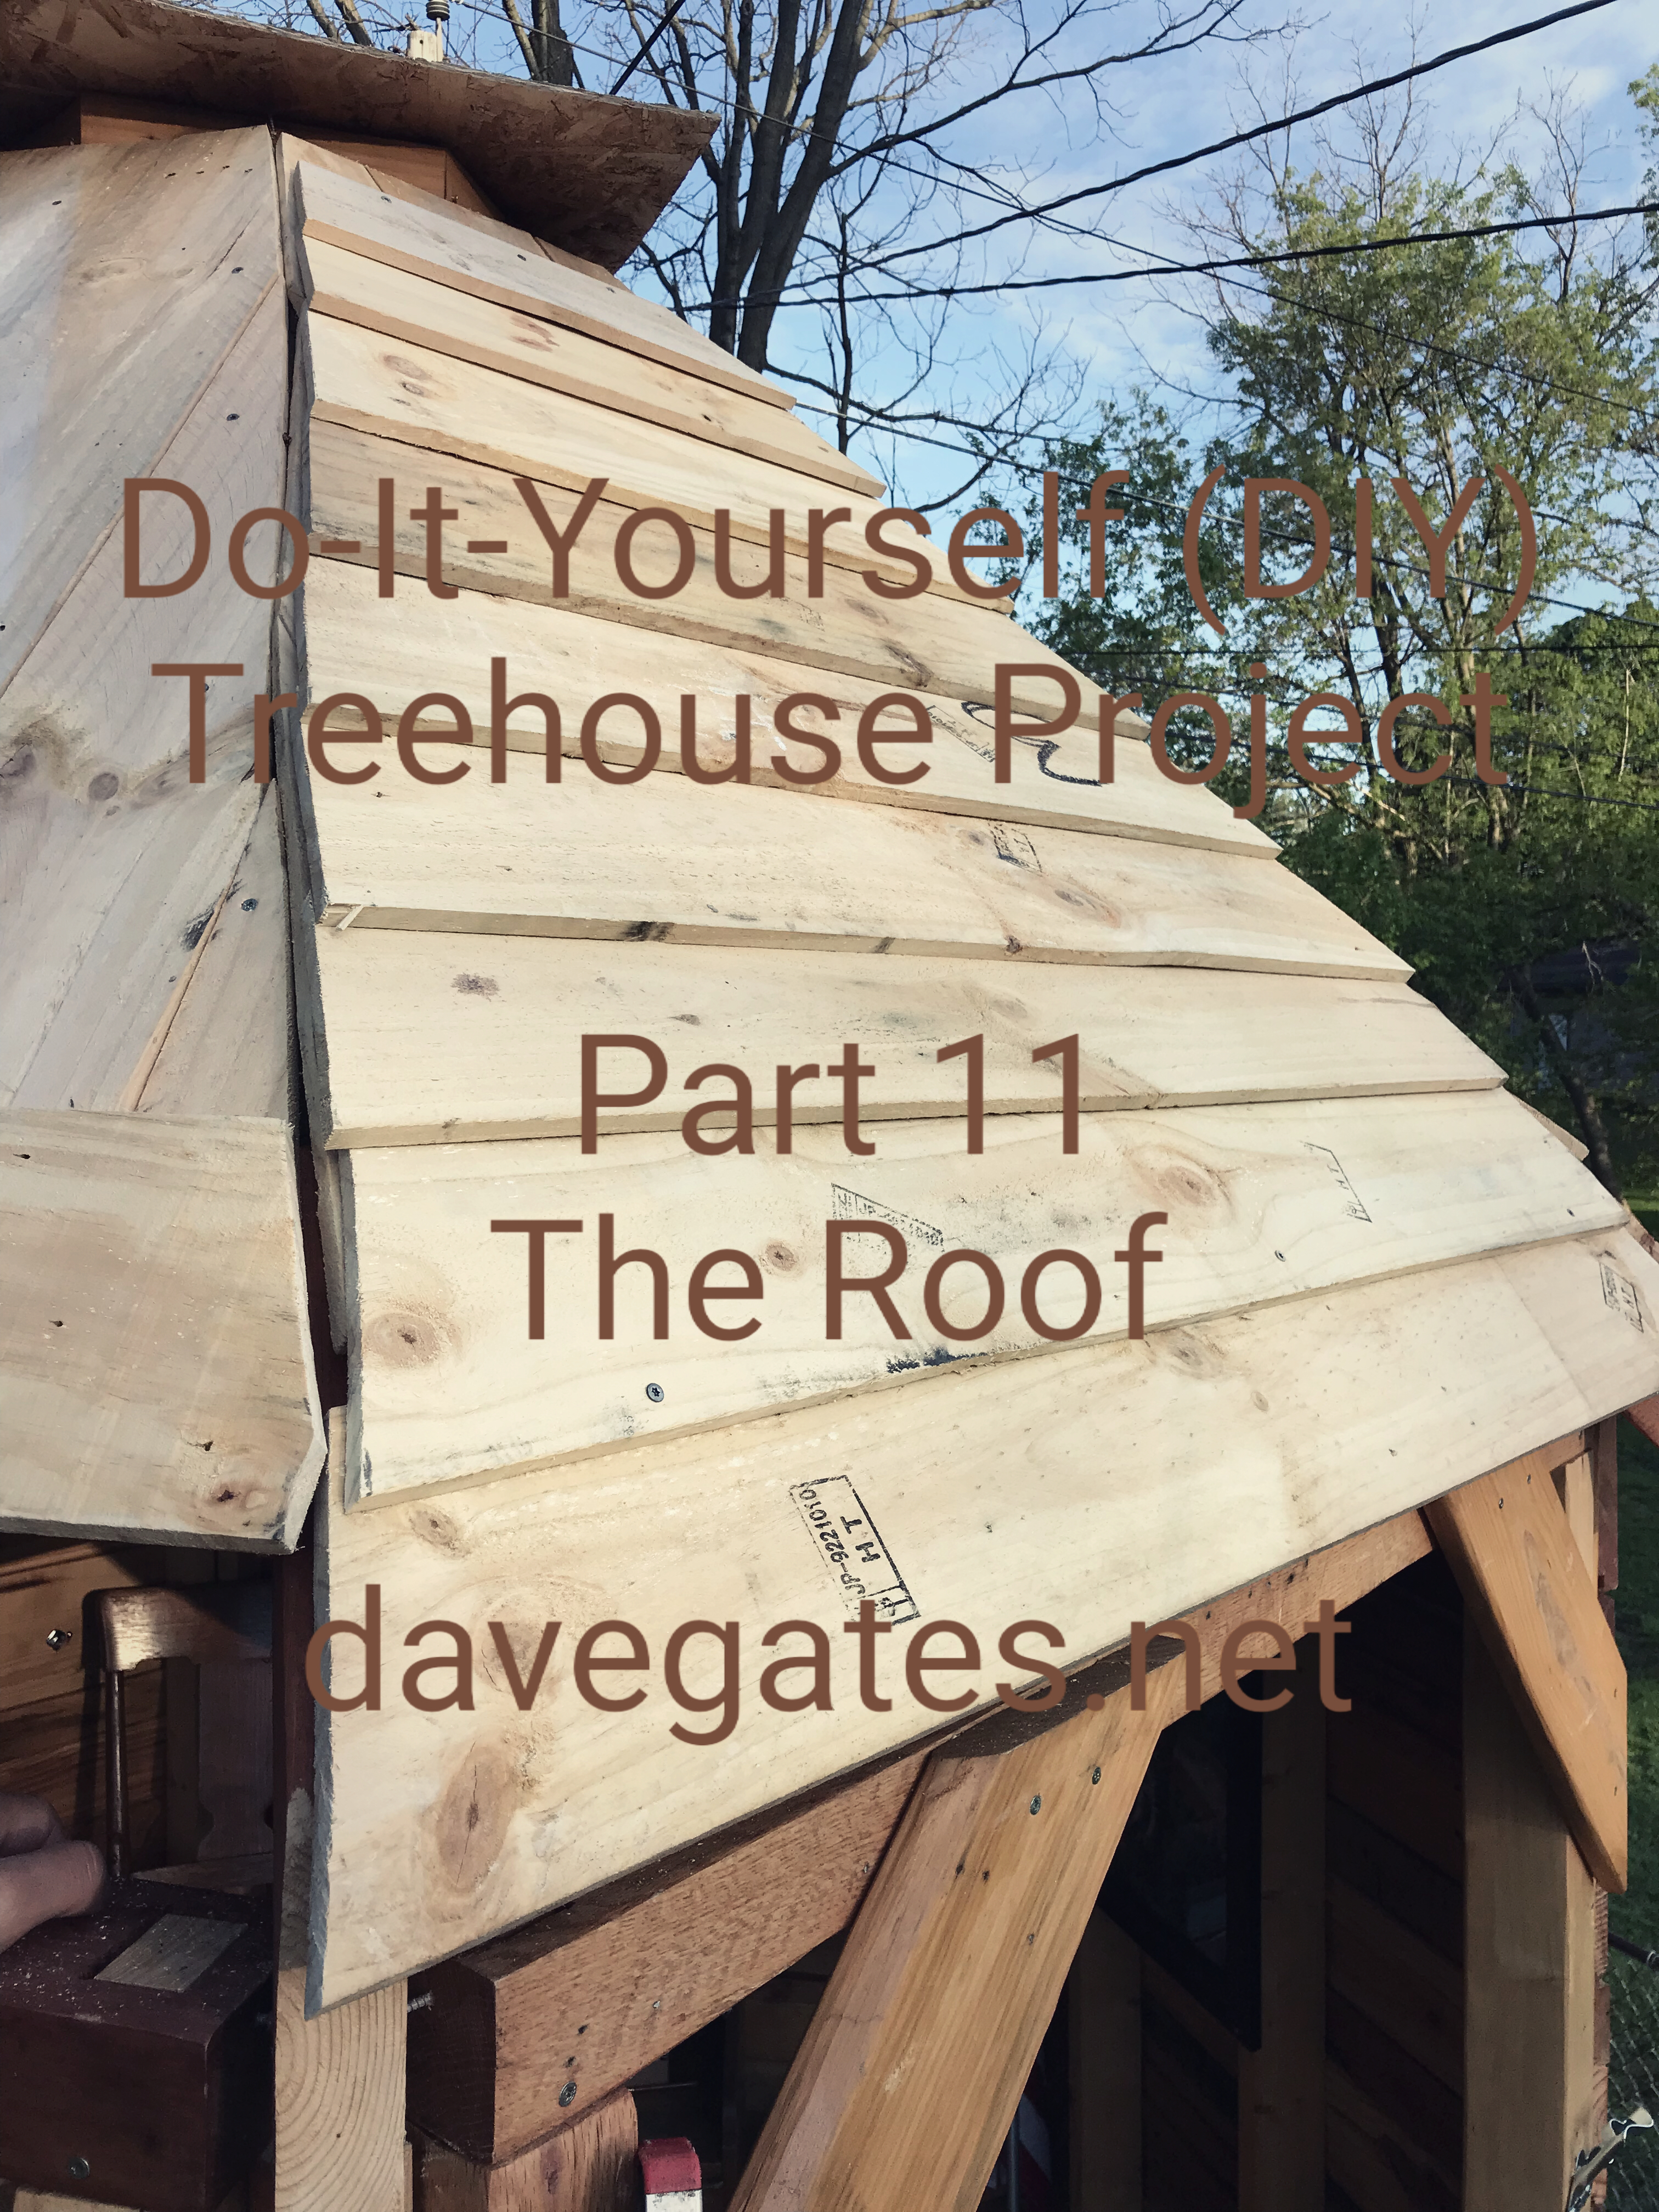 Do-It-Yourself Treehouse Part 11 - The Roof